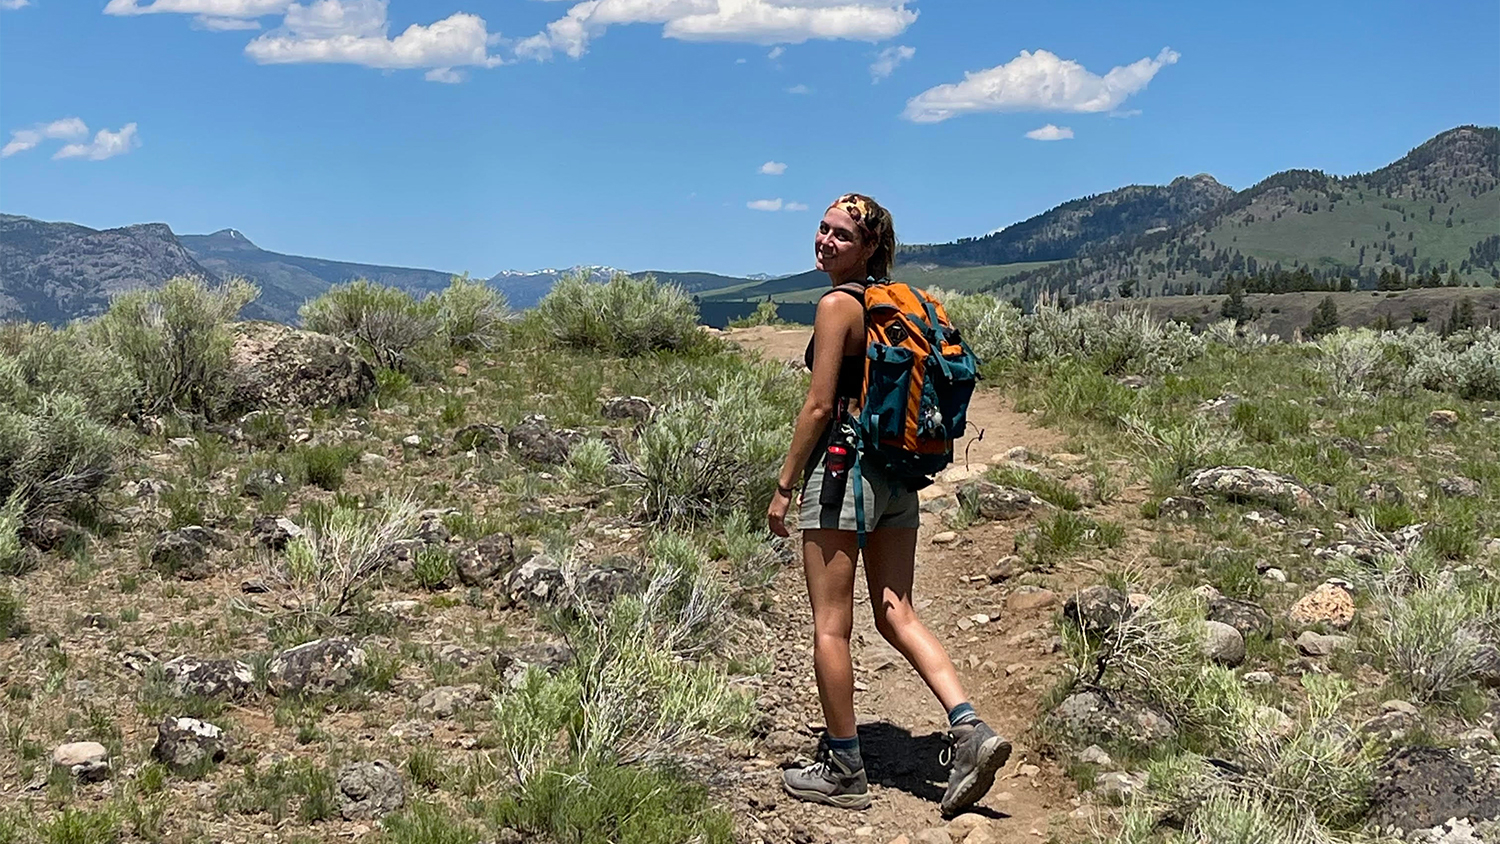 victoria hikes at Yellowstone - Not Your Average Summer: Sustainable Outdoor Experiences - Parks, Recreation and Tourism Management at NC State University